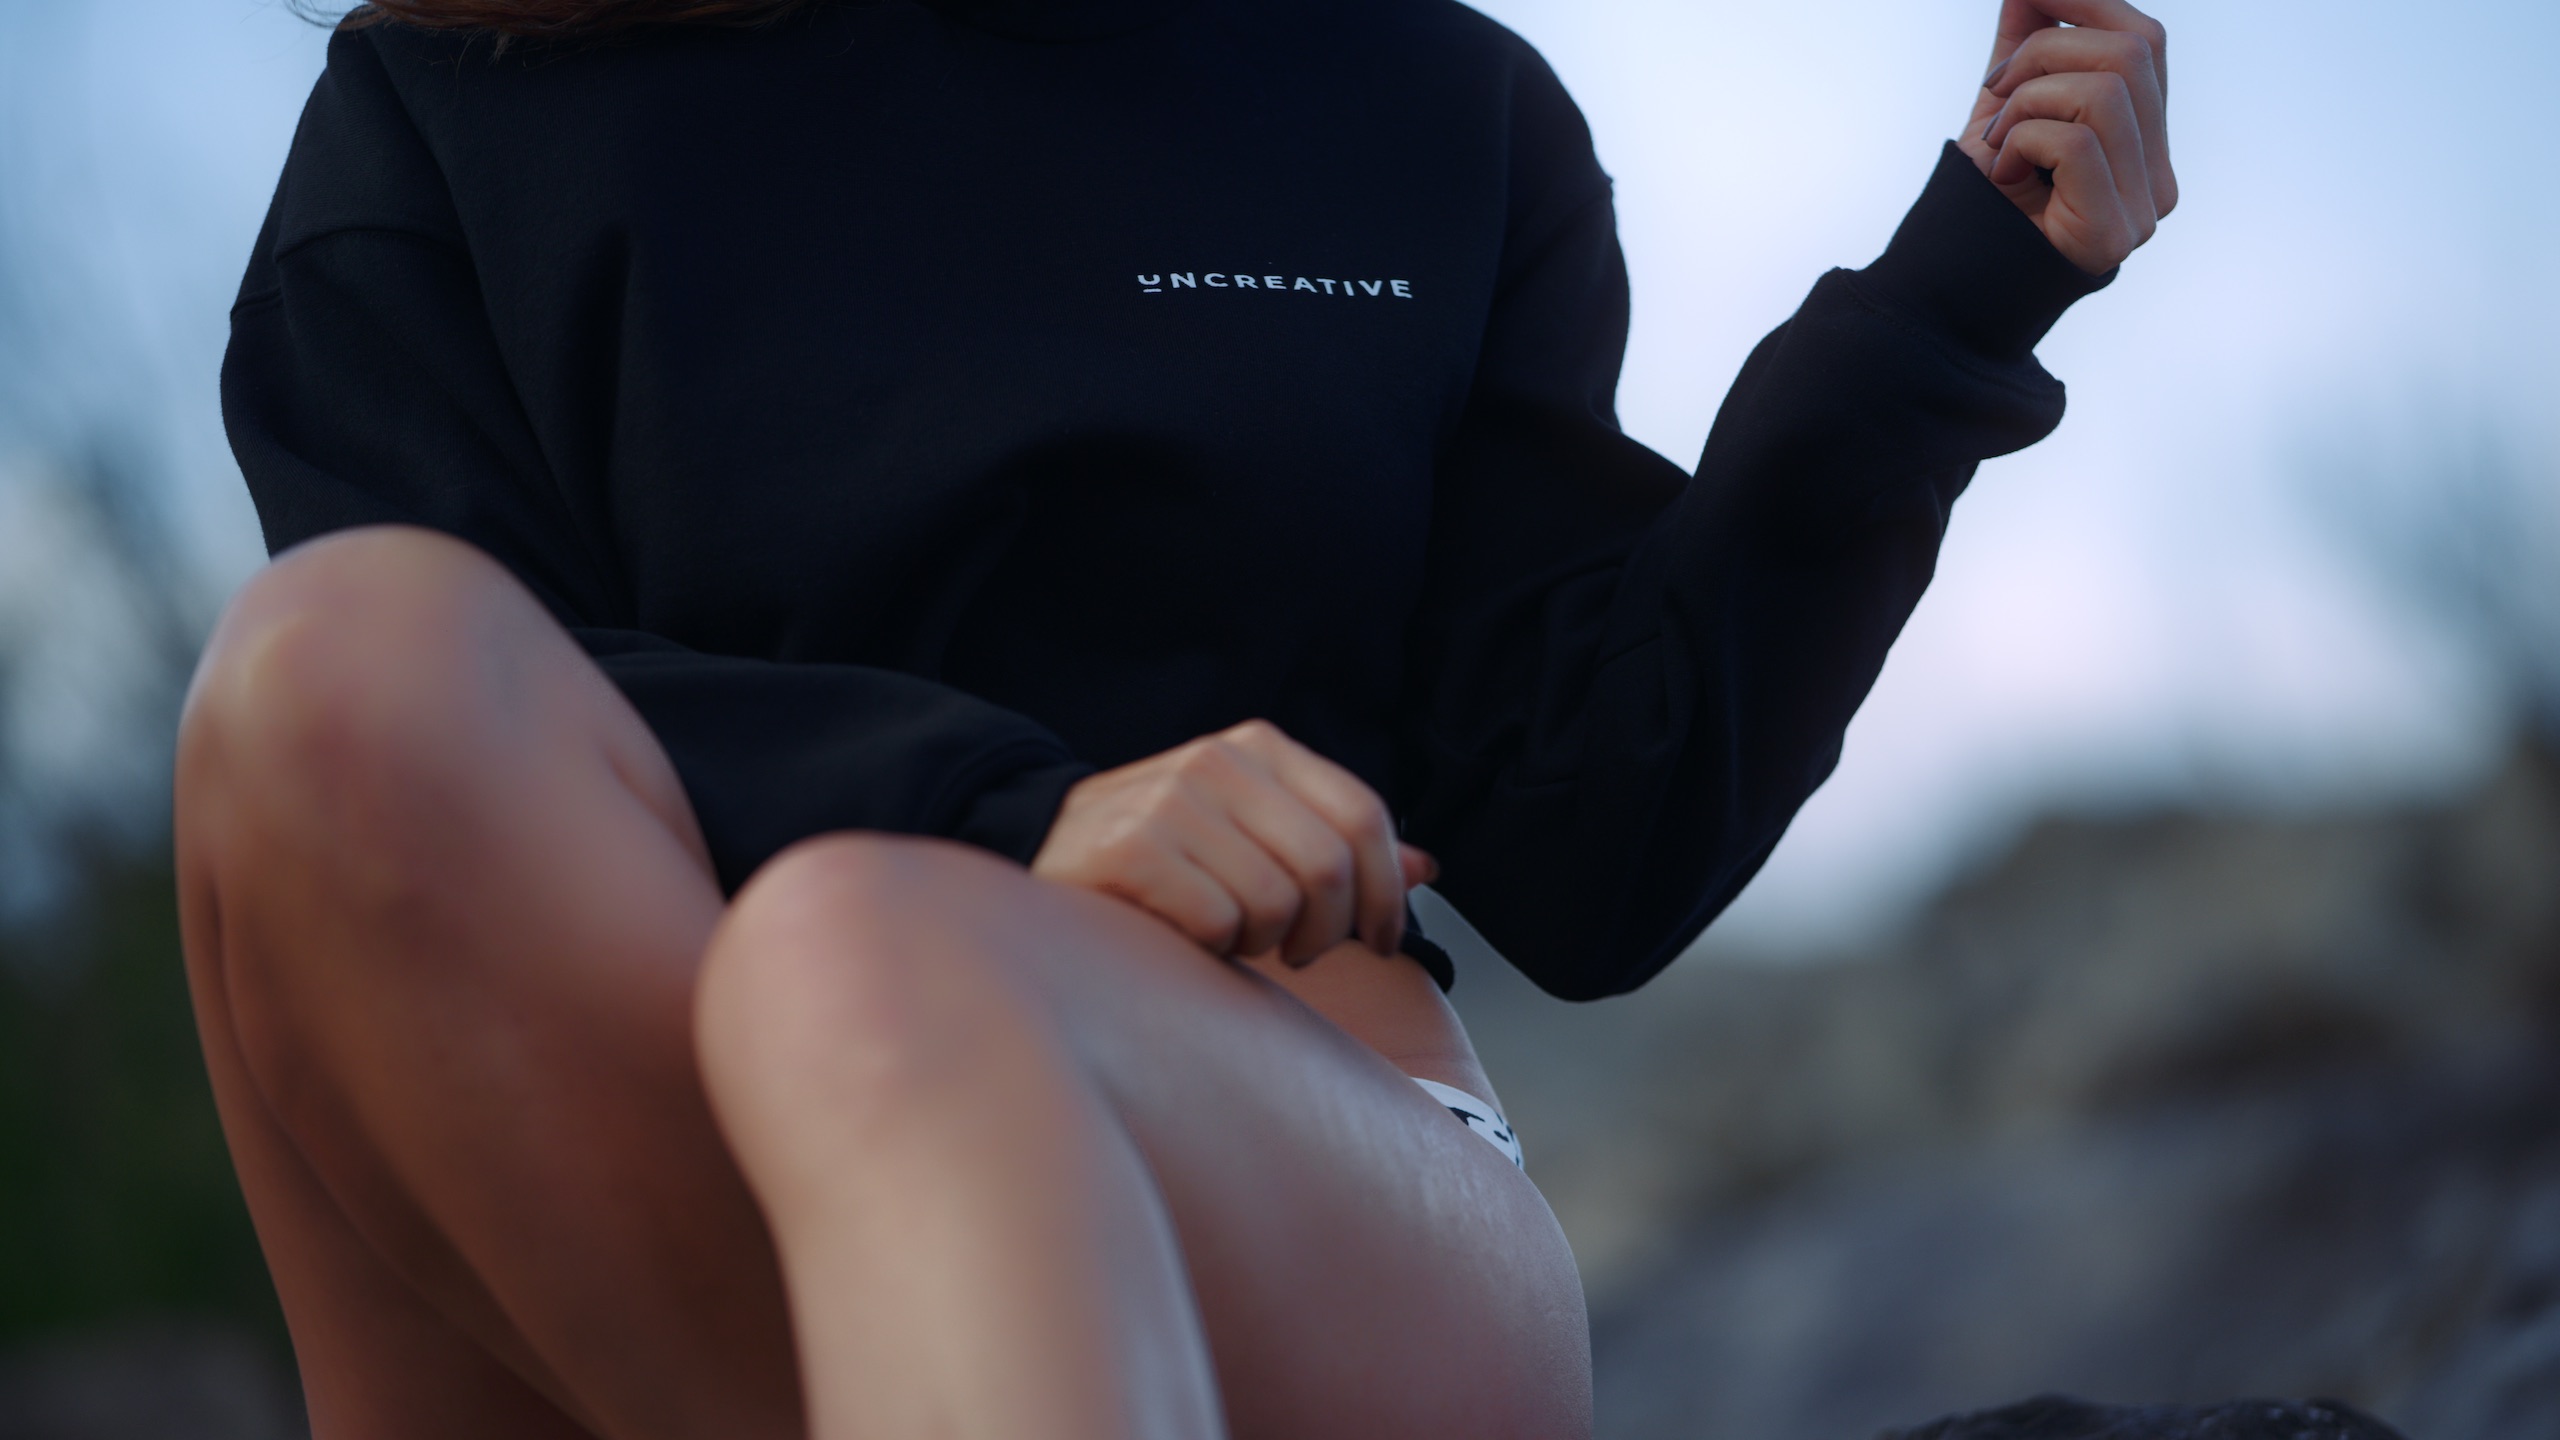 Uncreative Shop Hawaii Apparel on available at the Uncreative Shop Closeup of black hoodie and lower torso of a woman posing for the camera